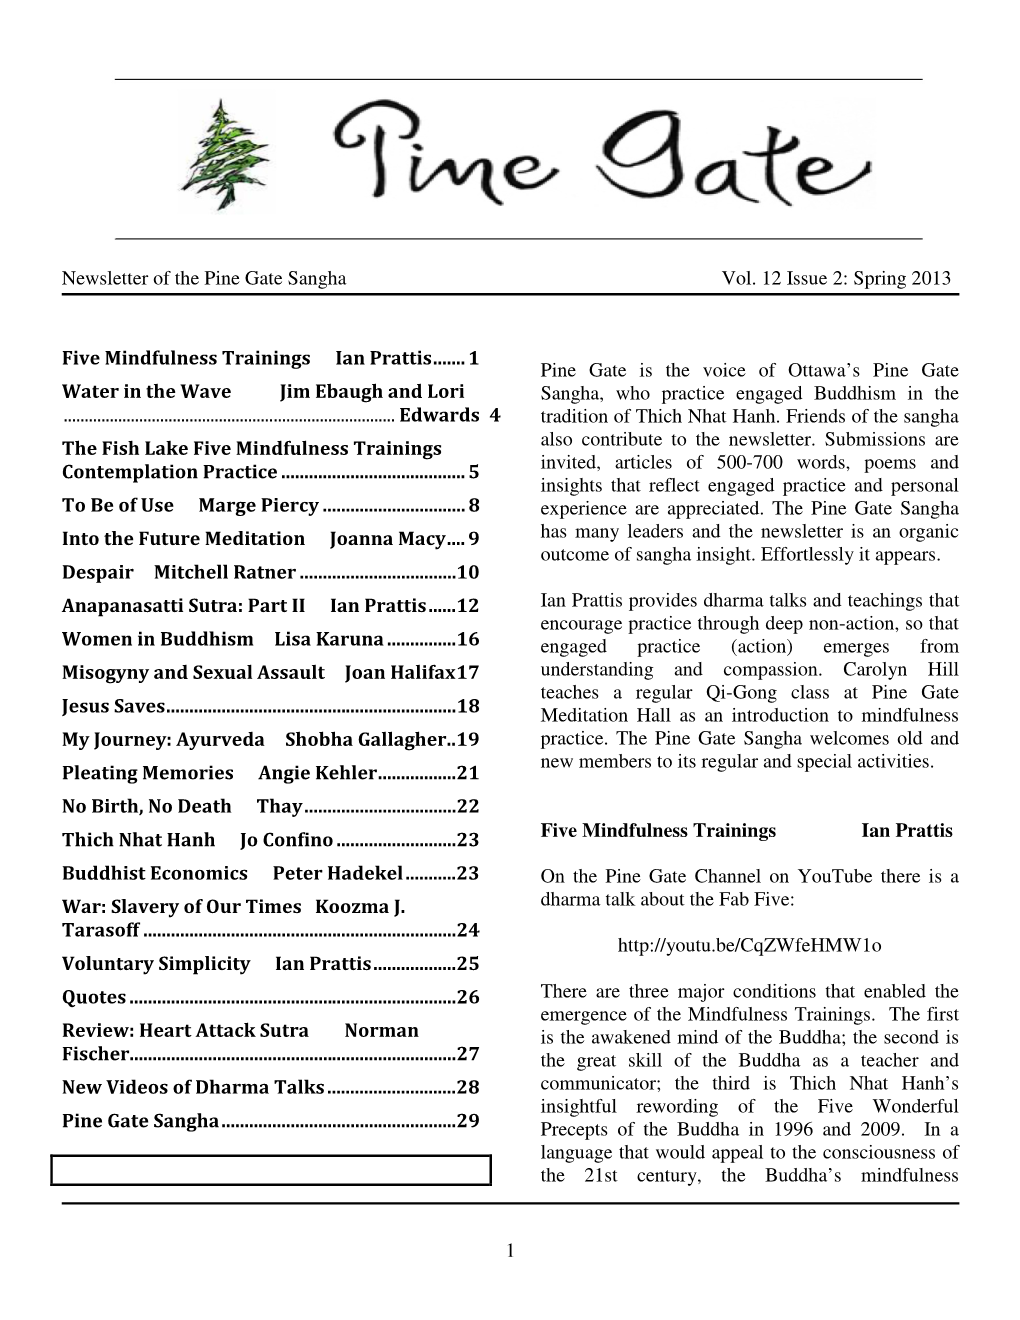 Newsletter of the Pine Gate Sangha Vol. 12 Issue 2: Spring 2013